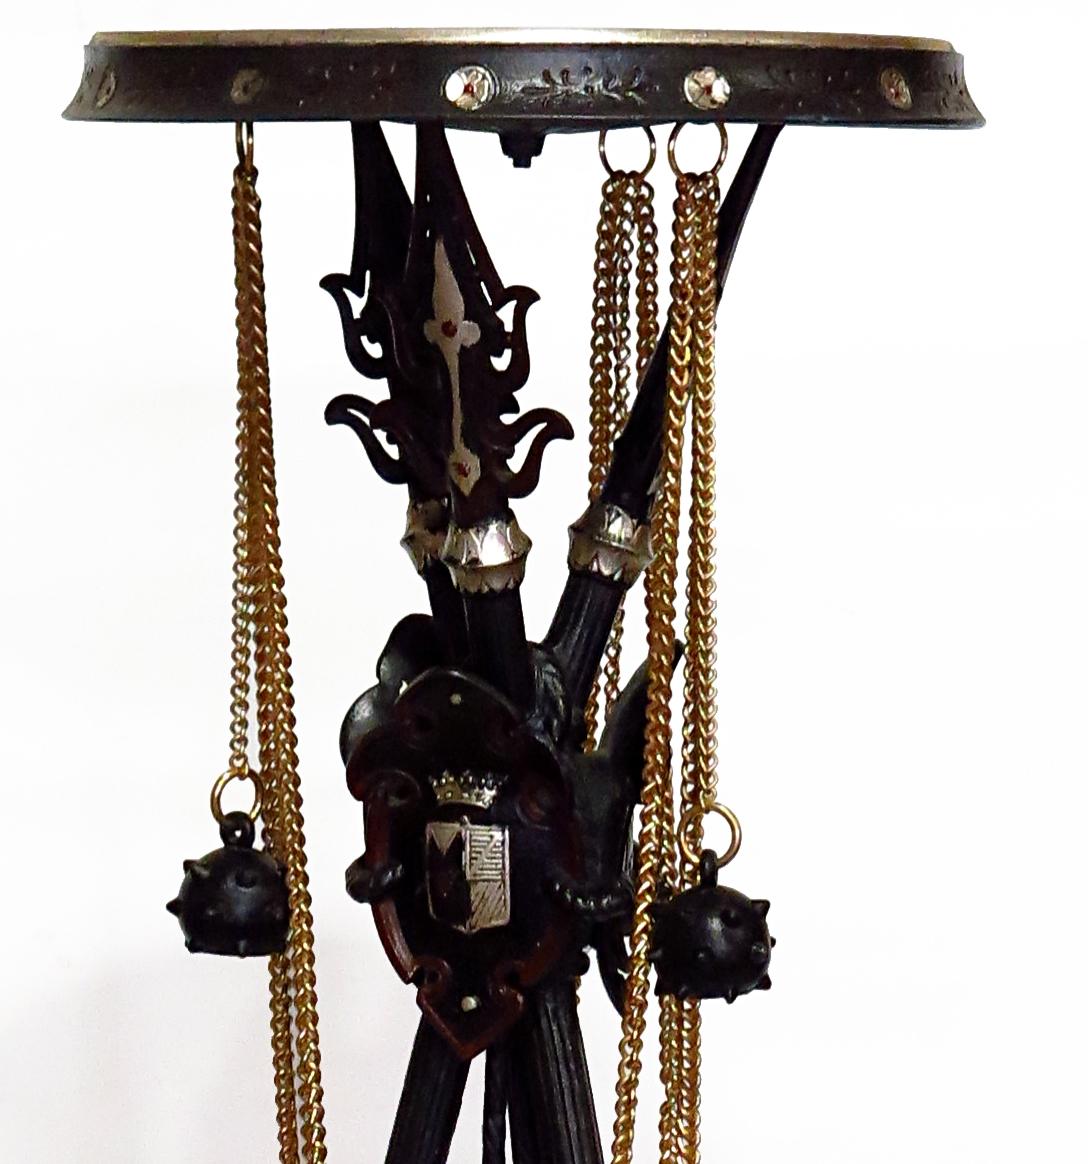 Rare weapon's room pedestal, in the « troubadour » style, patina spelter, rotating tray and bronze chains. It shows three jousting lances, crossed and gathered by a shield. Attributed to the Miroy Brothers Maison in Paris which was one leading